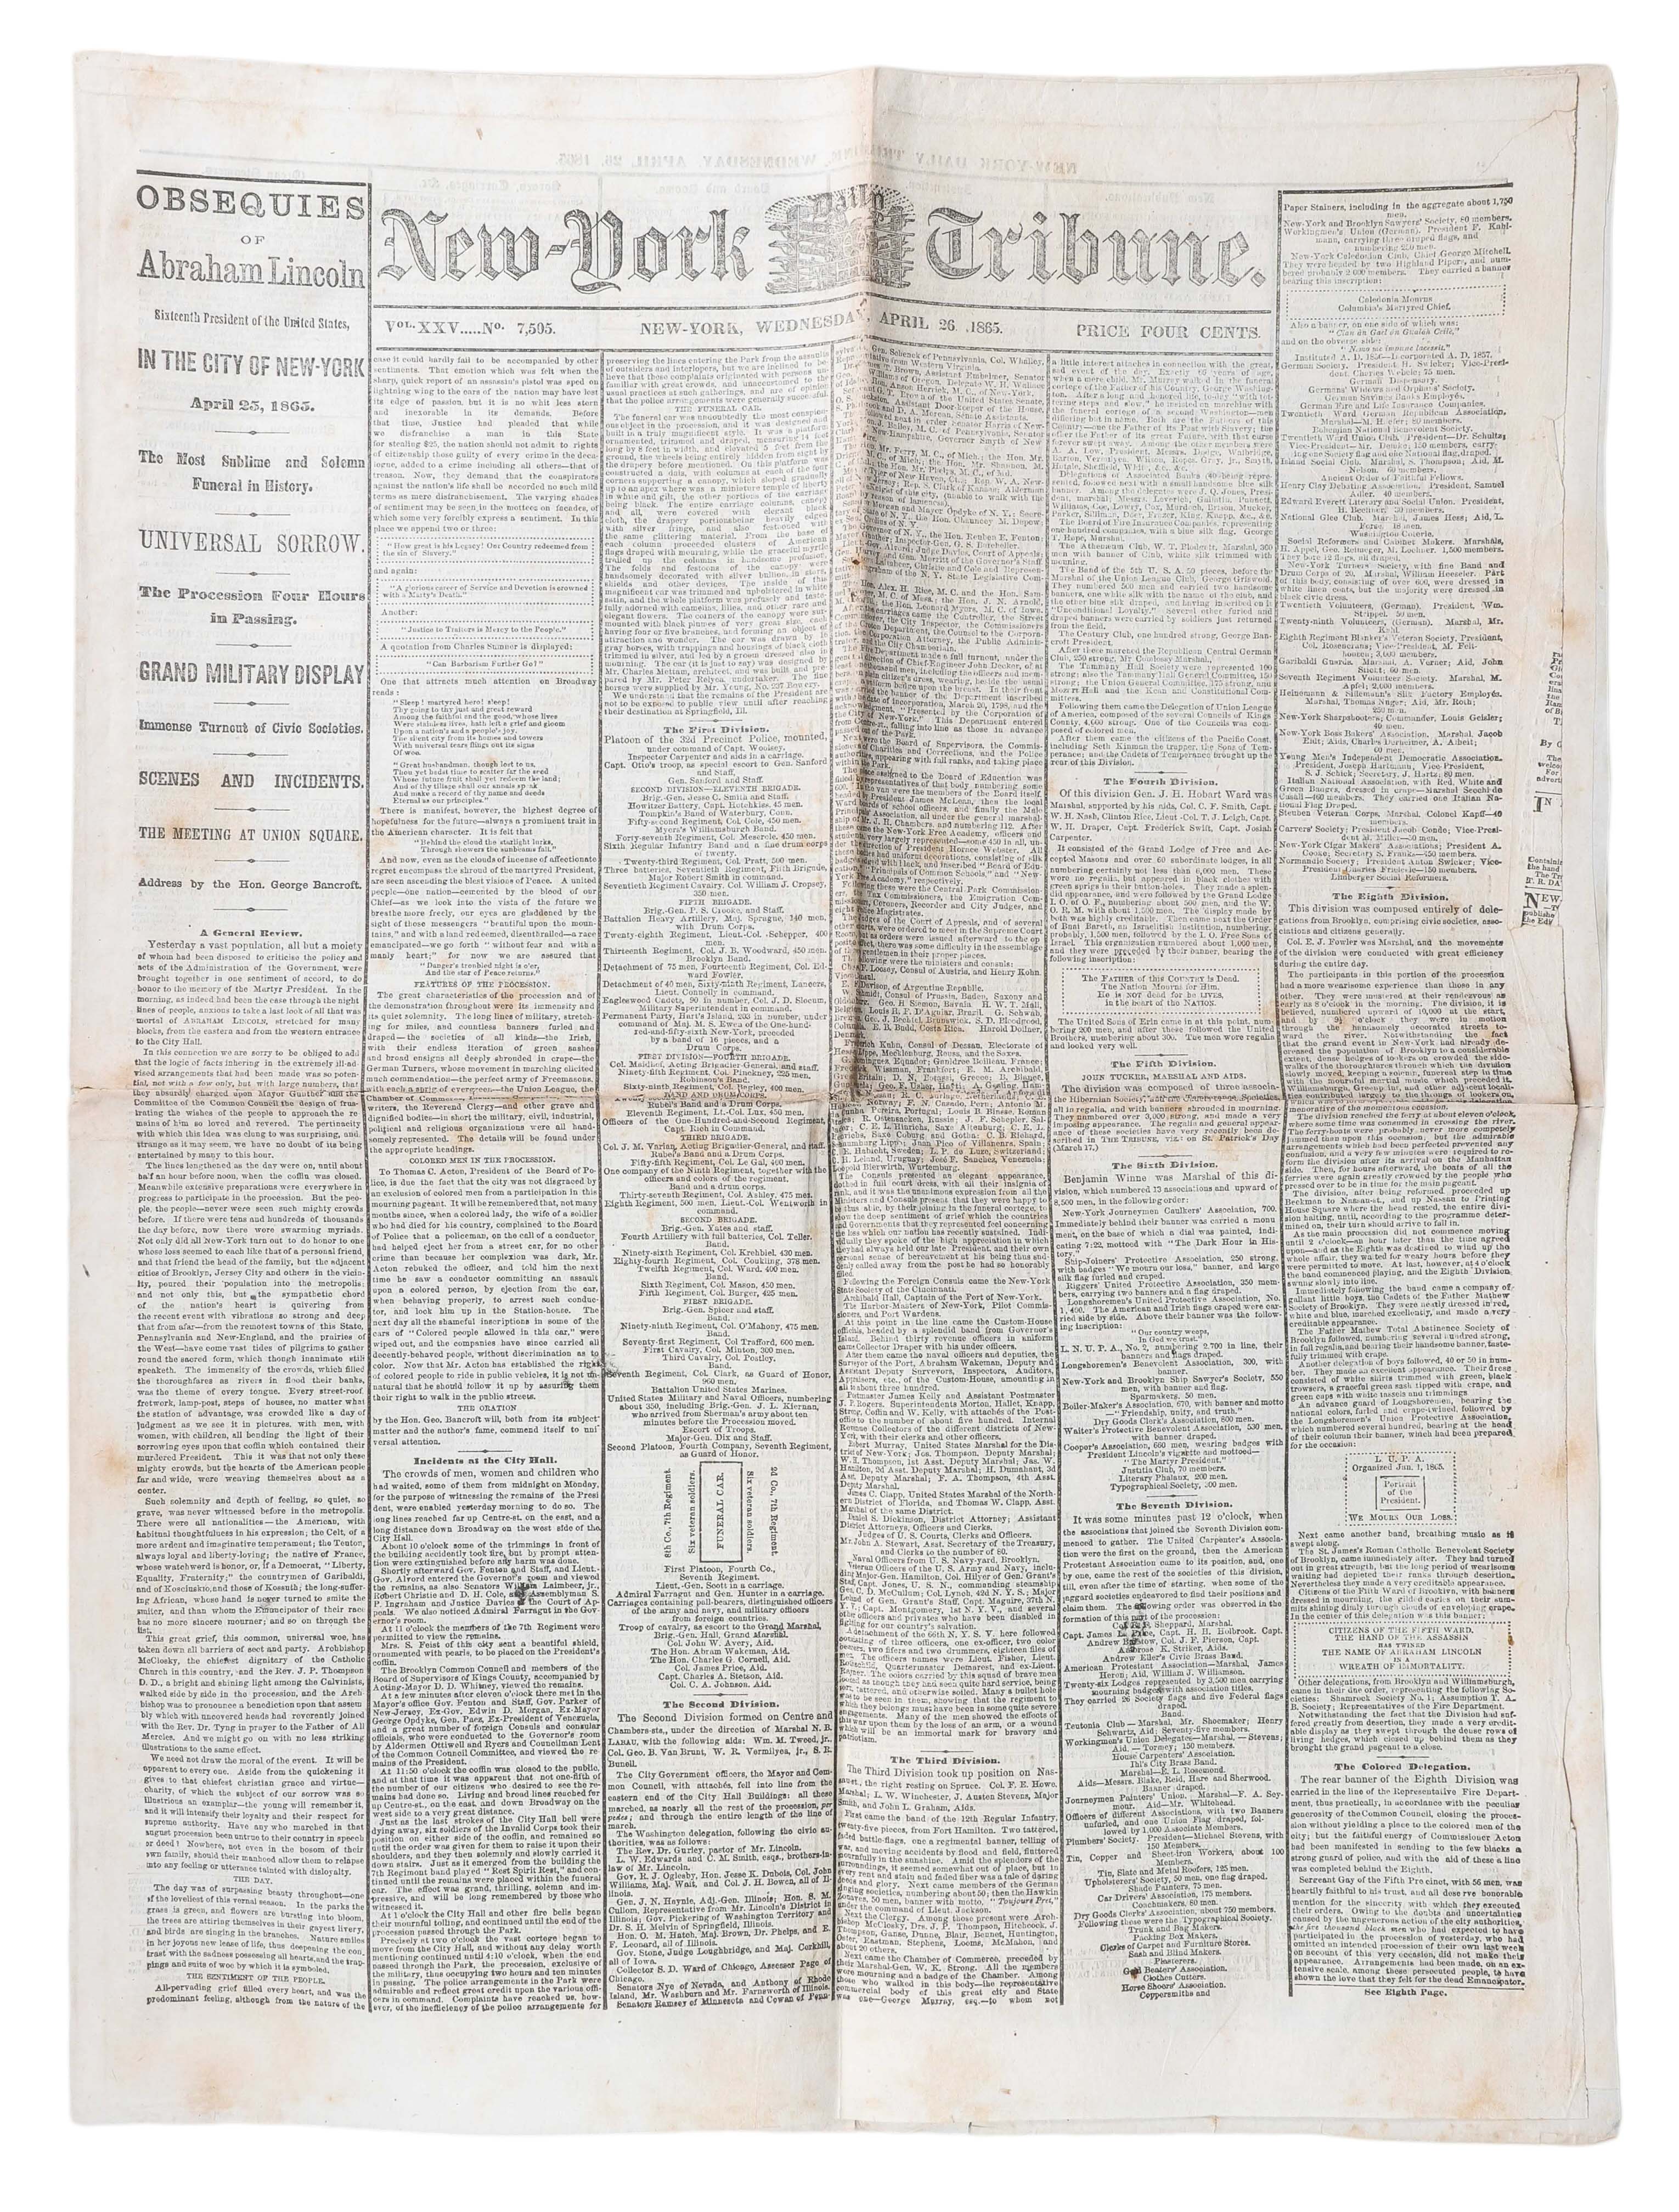 A copy of the New-York Tribune